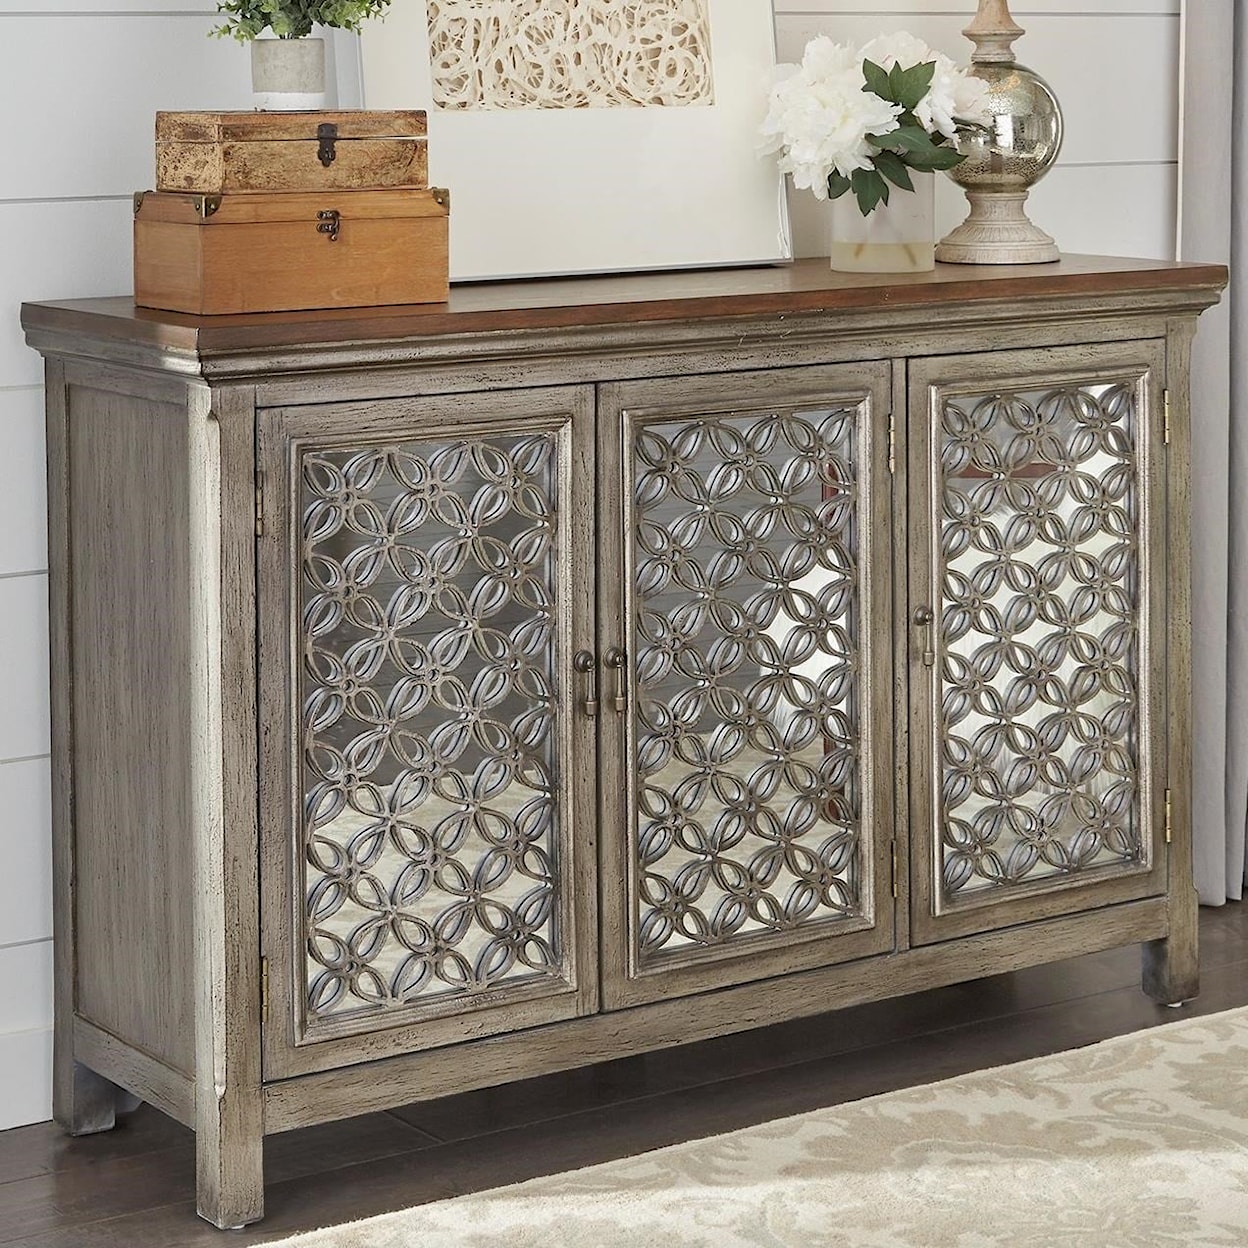 Liberty Furniture Eclectic Living Accents 3-Door Accent Chest